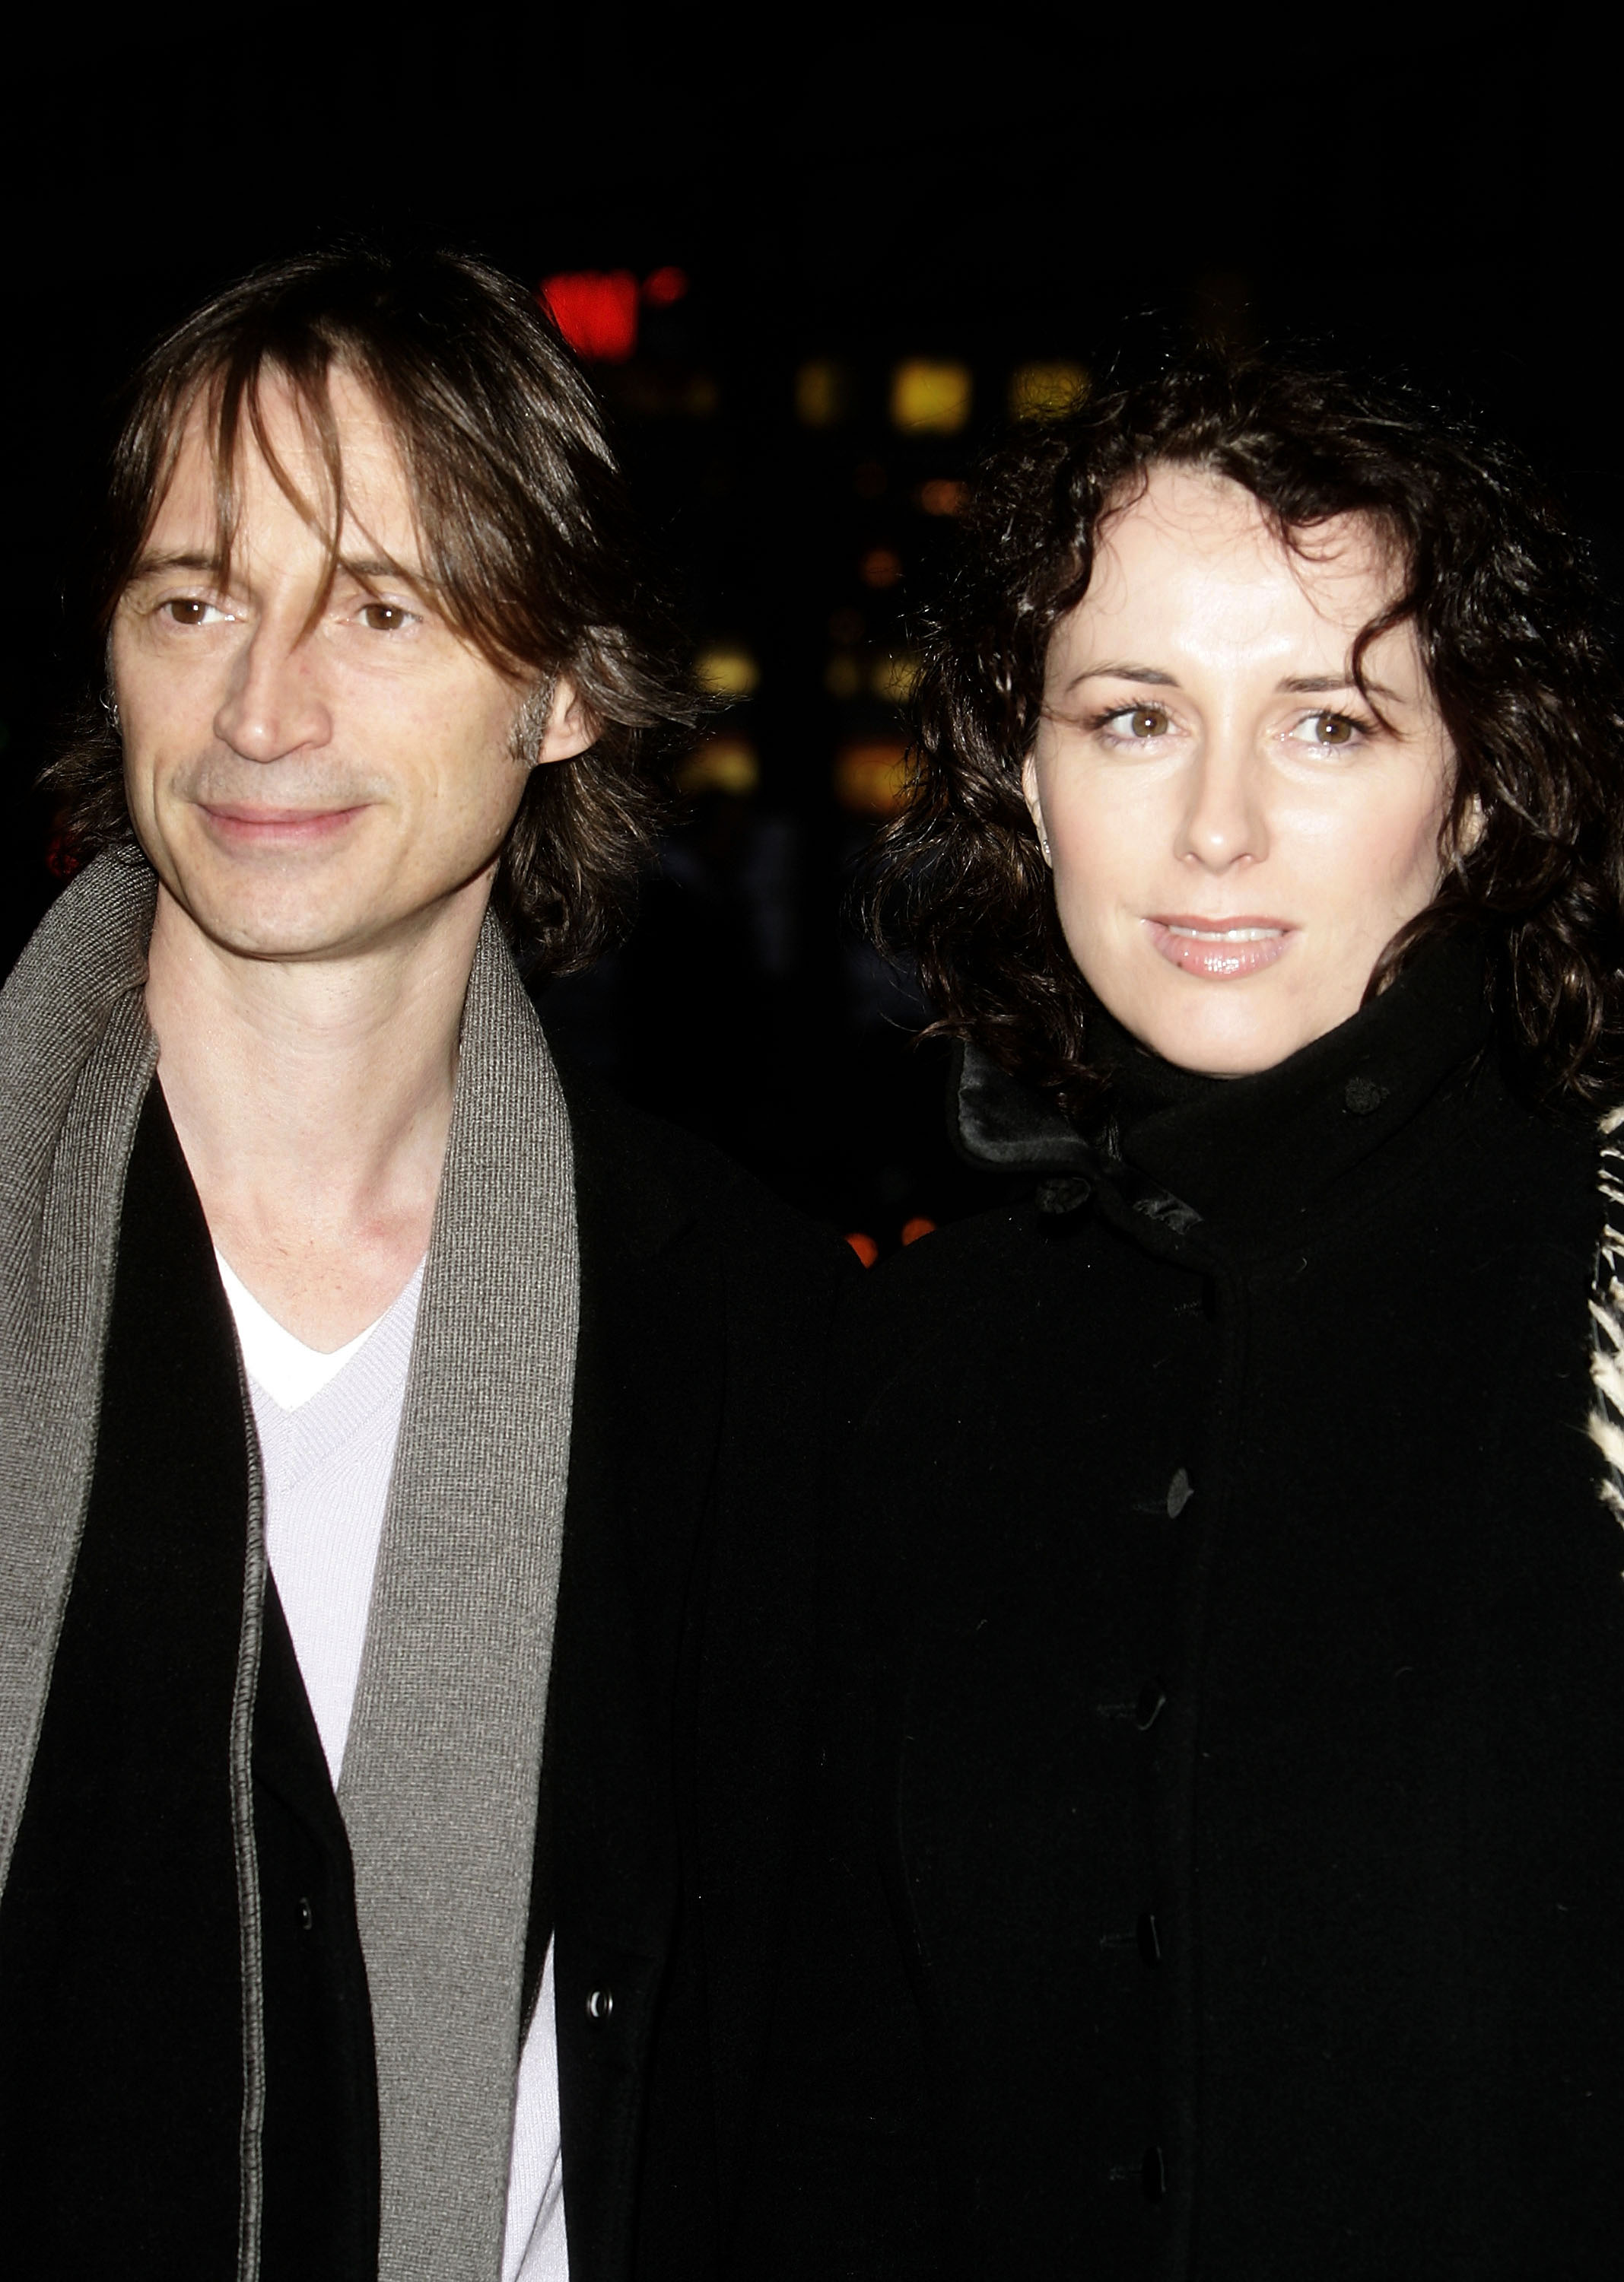 Robert Carlyle an Anastasia Shirley at the premiere of "The Mighty Celt" during the 55th annual Berlinale International Film Festival on February 15, 2005, in Berlin, Germany. | Source: Getty Images